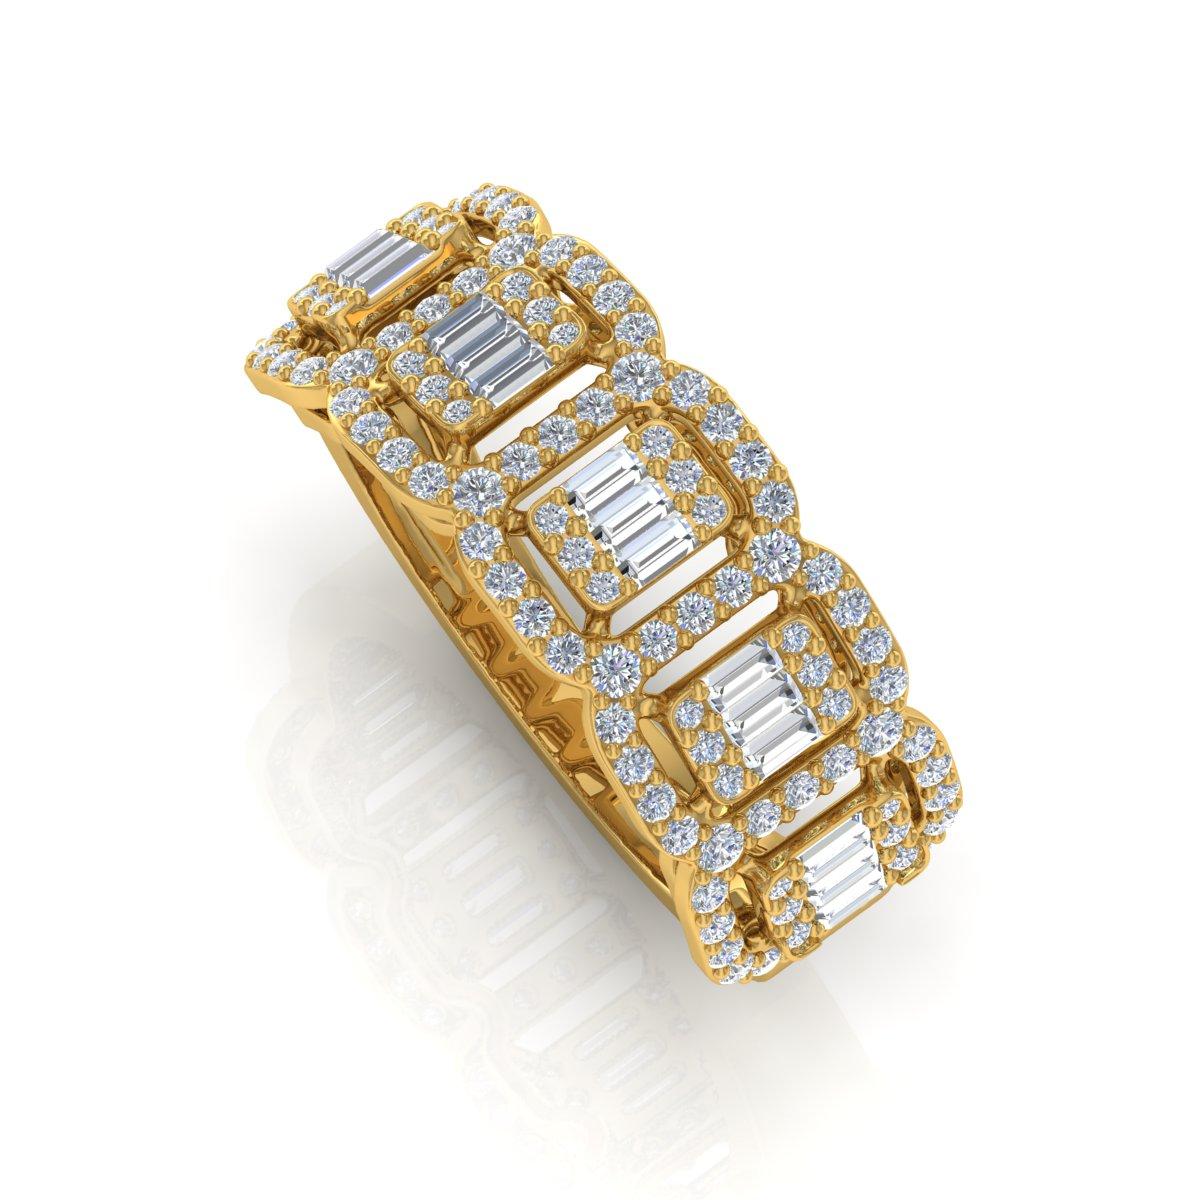 For Sale:  0.95 Carat Si Clarity HI Color Baguette Diamond Ring 18k Yellow Gold Jewelry 2